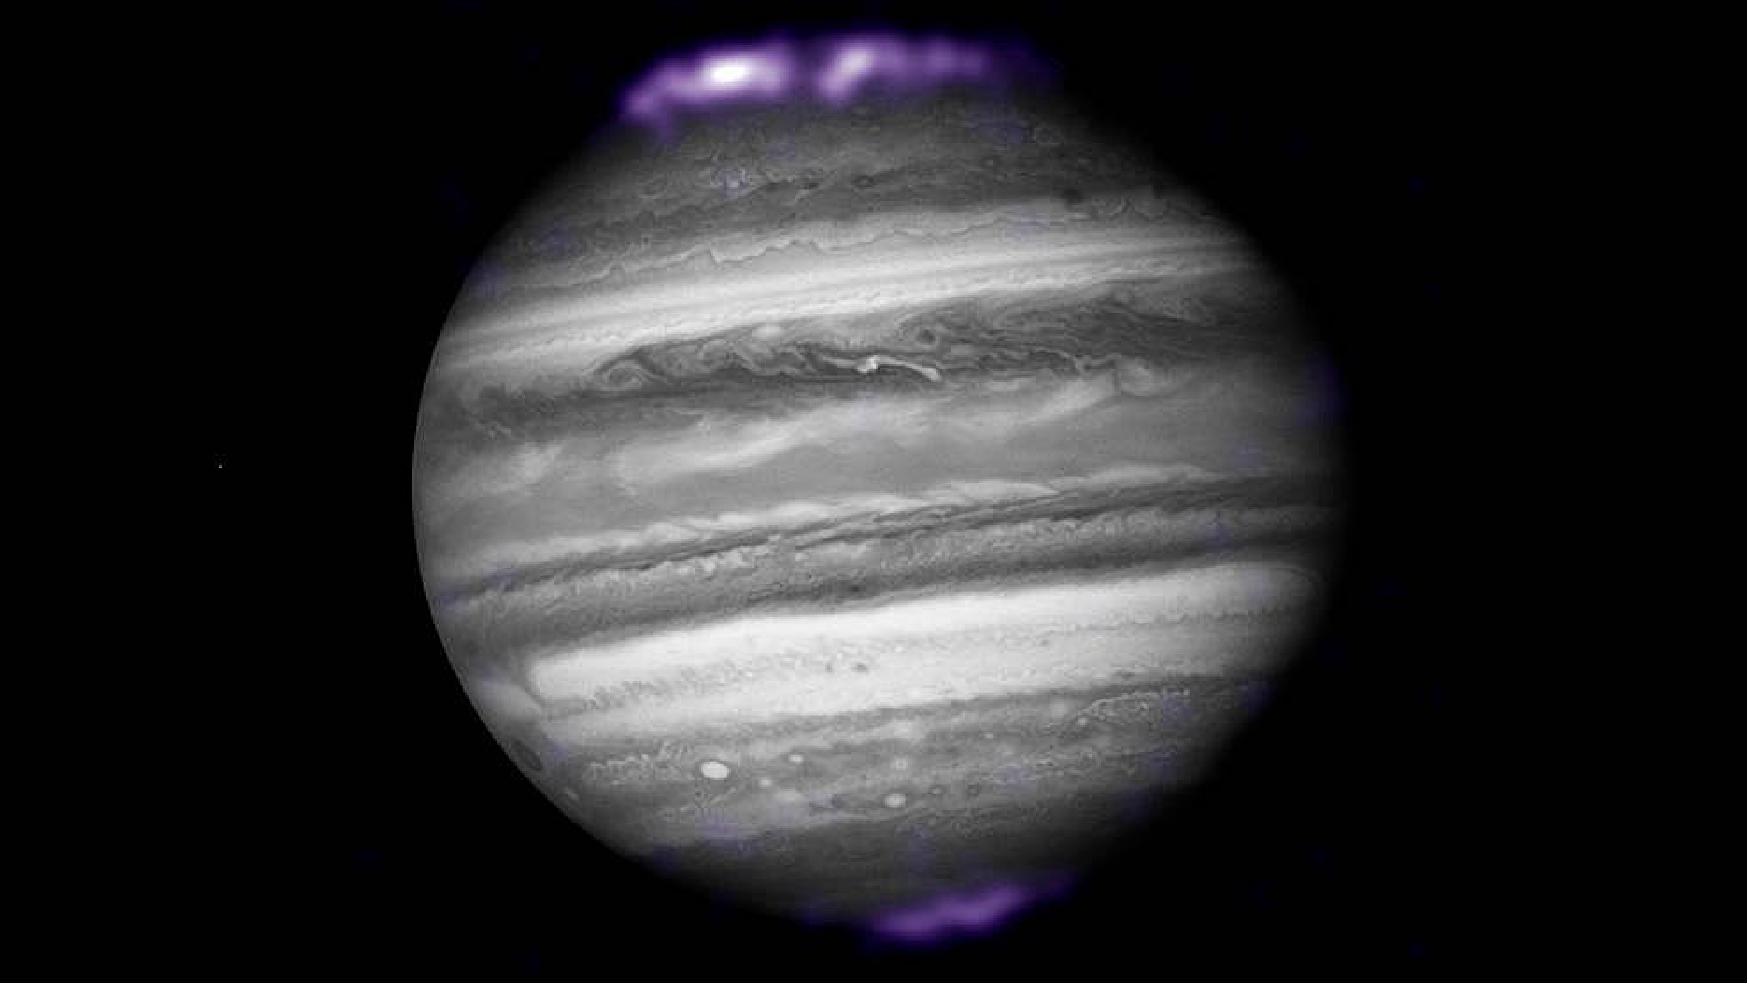 Figure 17: The purple hues in this image show X-ray emissions from Jupiter's auroras, detected by NASA's Chandra Space Telescope in 2007. They are overlaid on an image of Jupiter taken by NASA's Hubble Space Telescope. Jupiter is the only gas giant planet where scientists have detected X-ray auroras [image credits: (X-ray) NASA/CXC/SwRI/R. Gladstone et al.; (Optical) NASA/ESA/Hubble Heritage (AURA/STScI)]